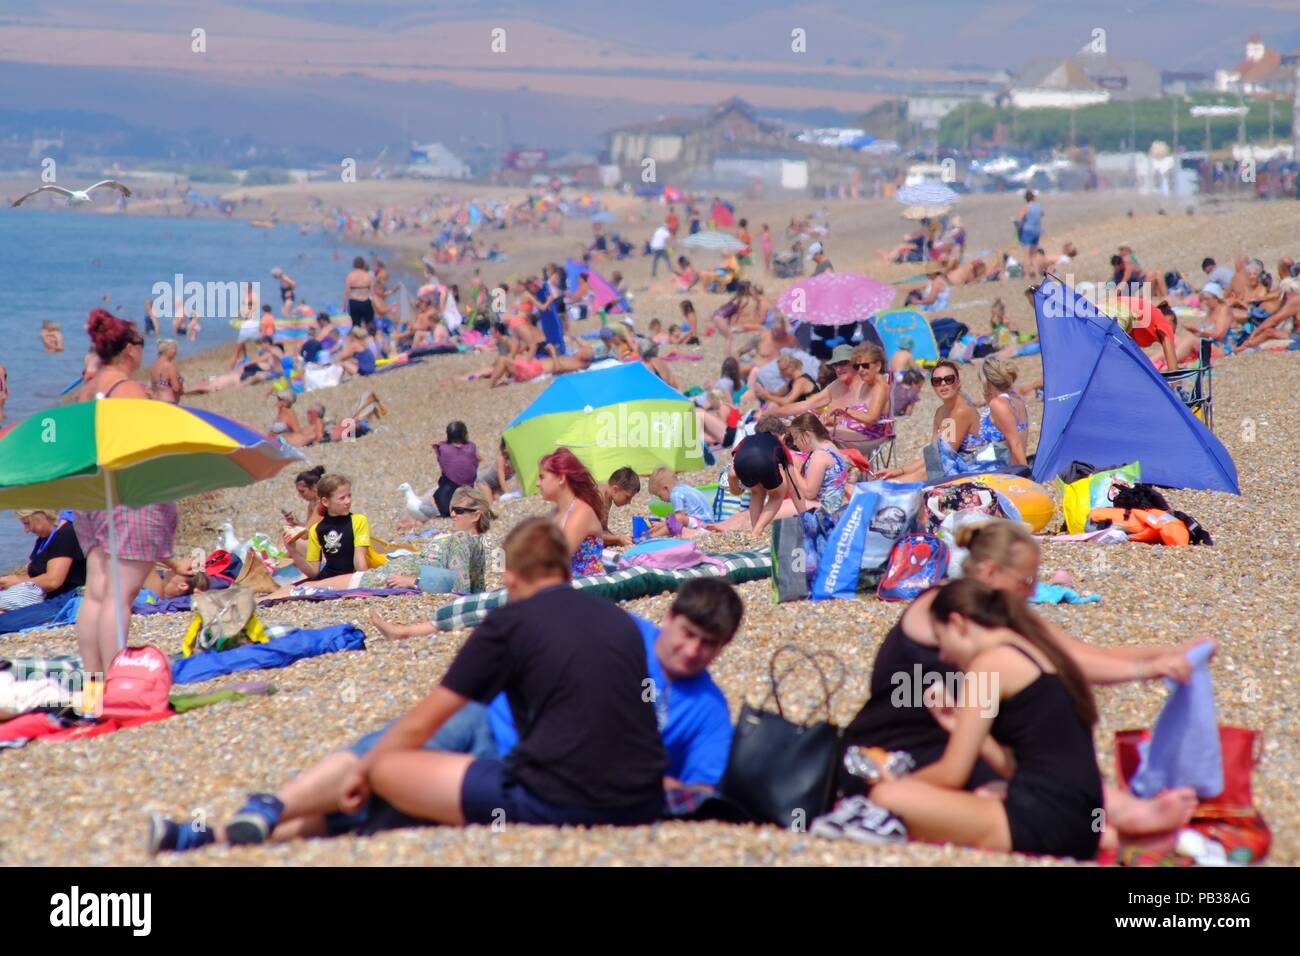 Seaford, East Sussex, UK. 26th July 2018. Temperatures already rising on Seaford Beach, East Sussex. © Peter Cripps/Alamy Live News Stock Photo